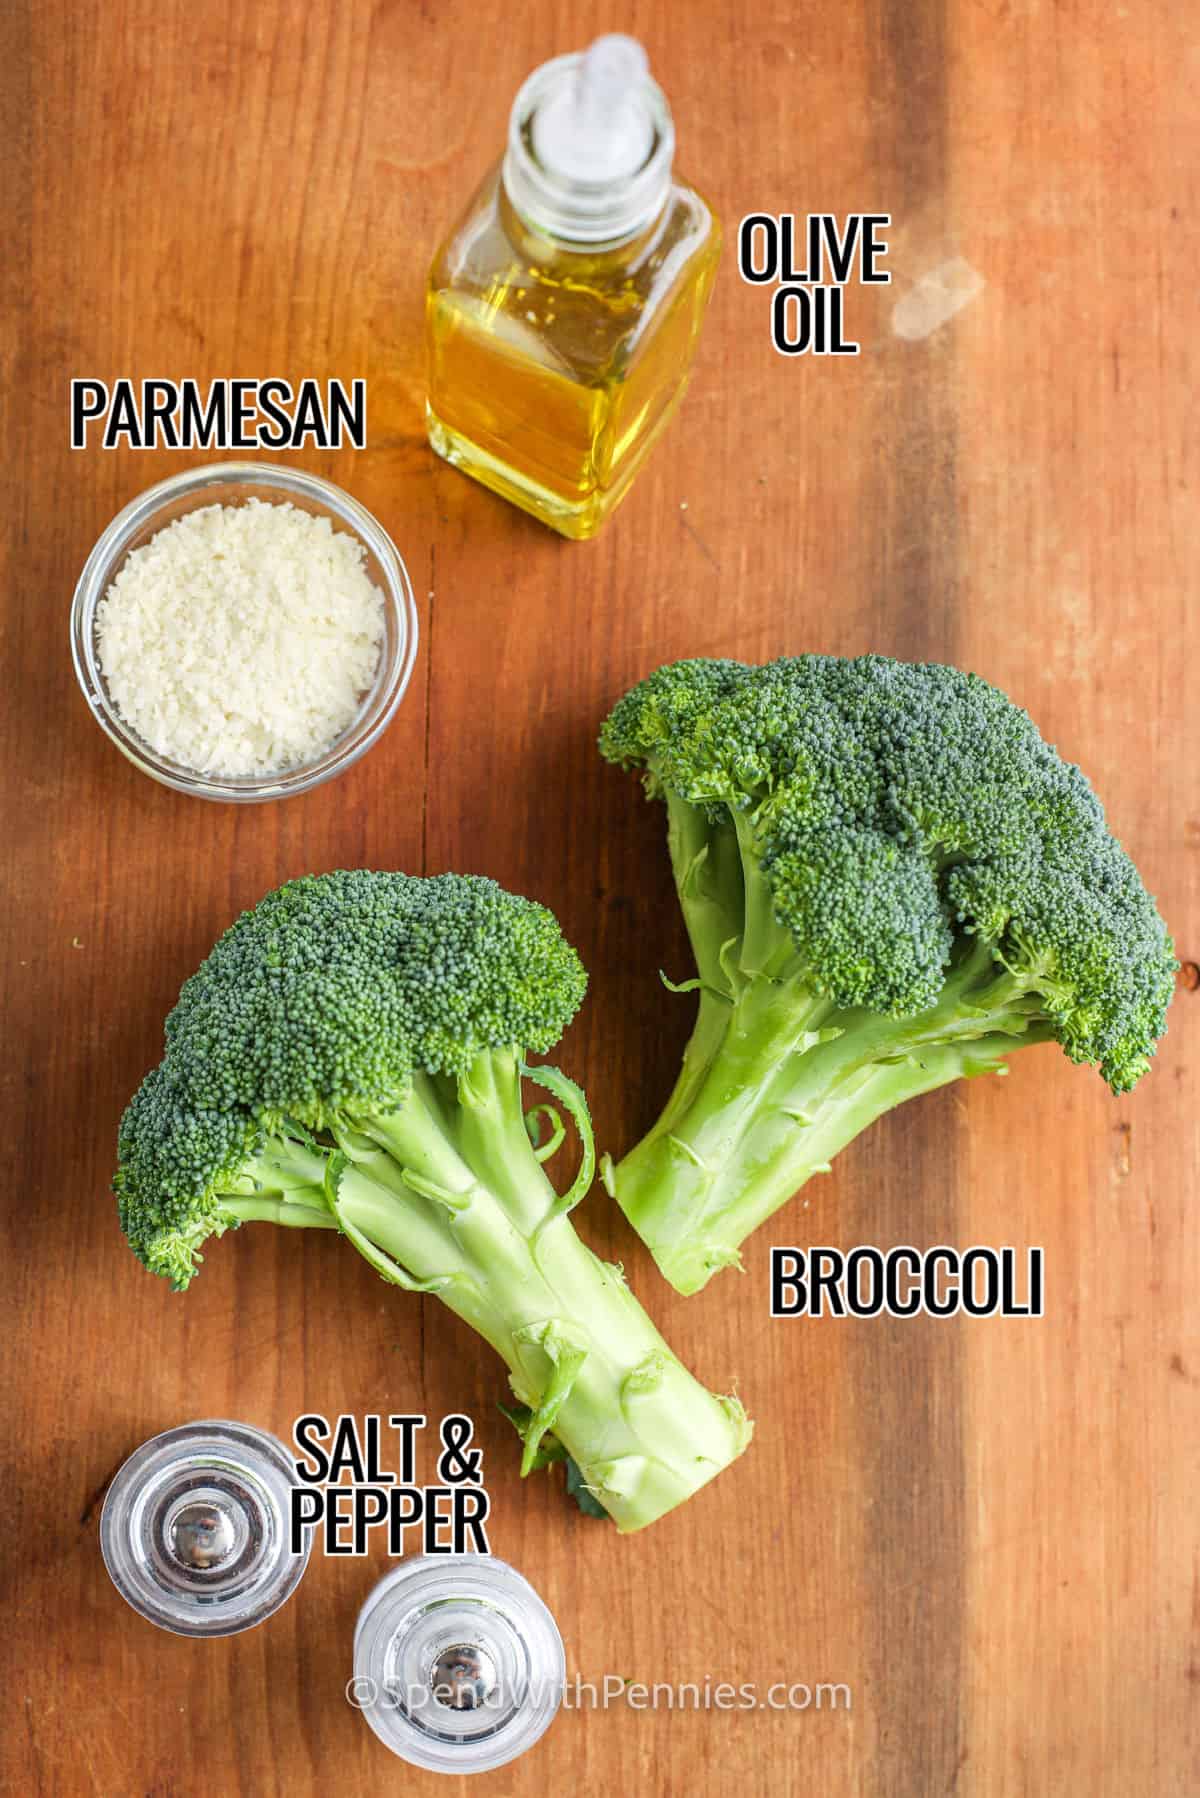 Oven Roasted Broccoli ingredients with labels